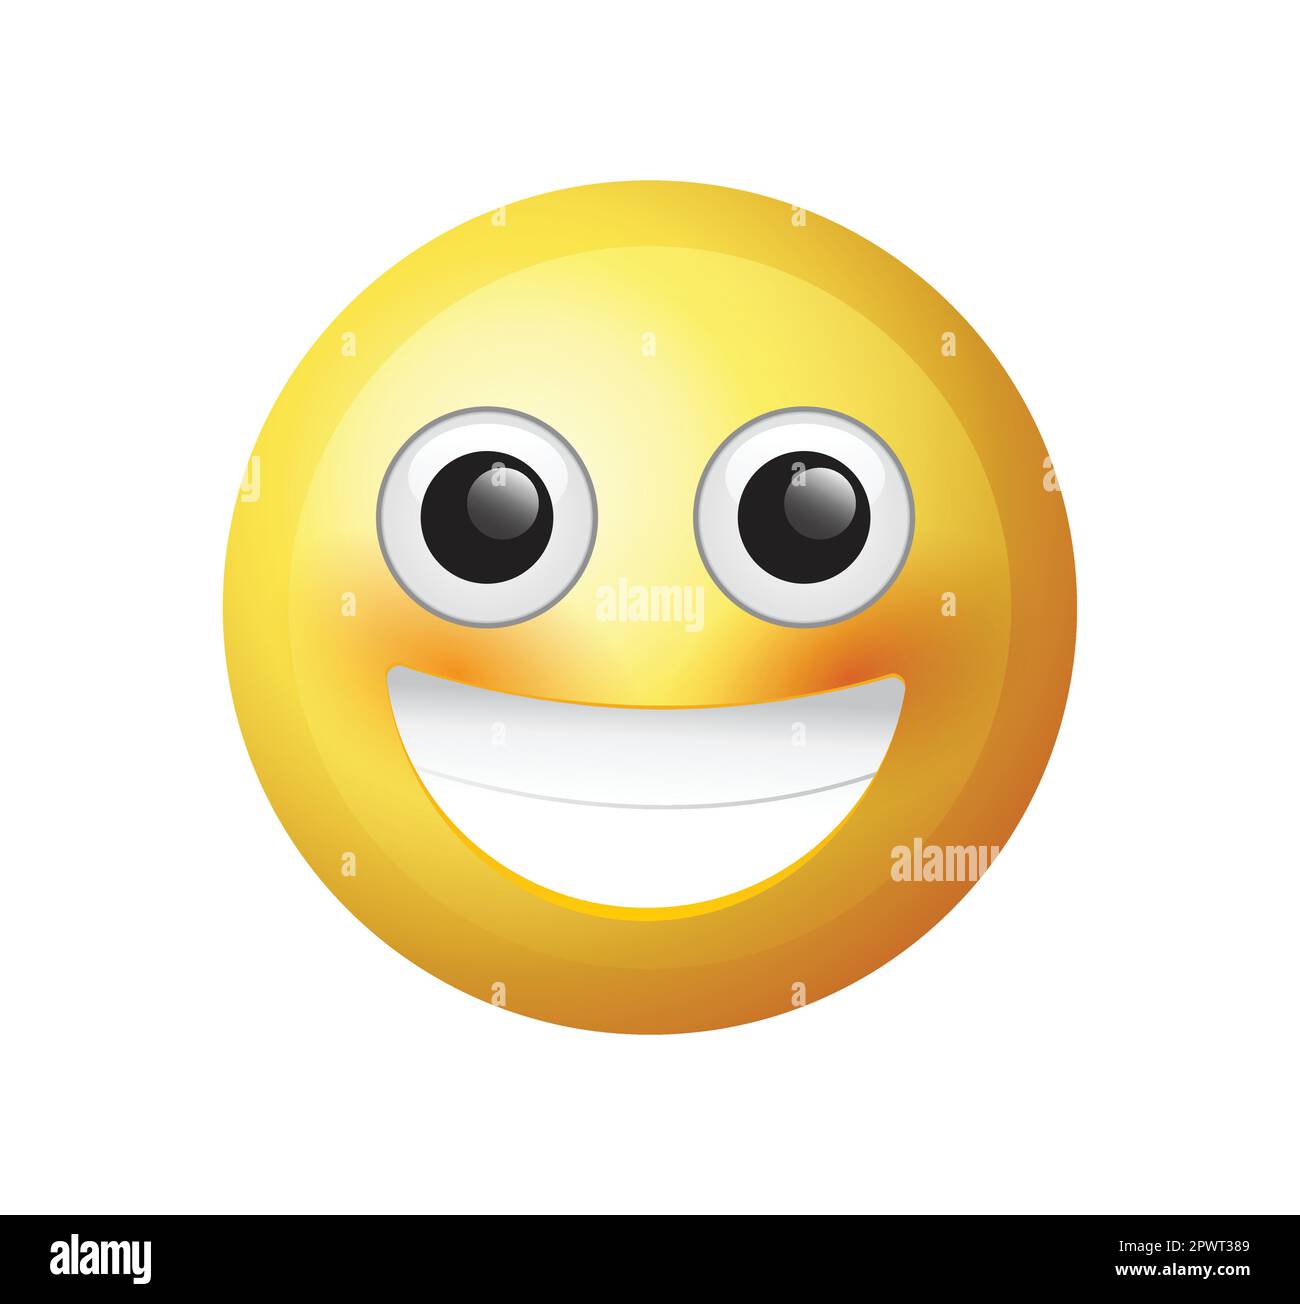 High quality emoticon vector on white background. Smiling emoji, blushing smiley face icon. Stock Vector